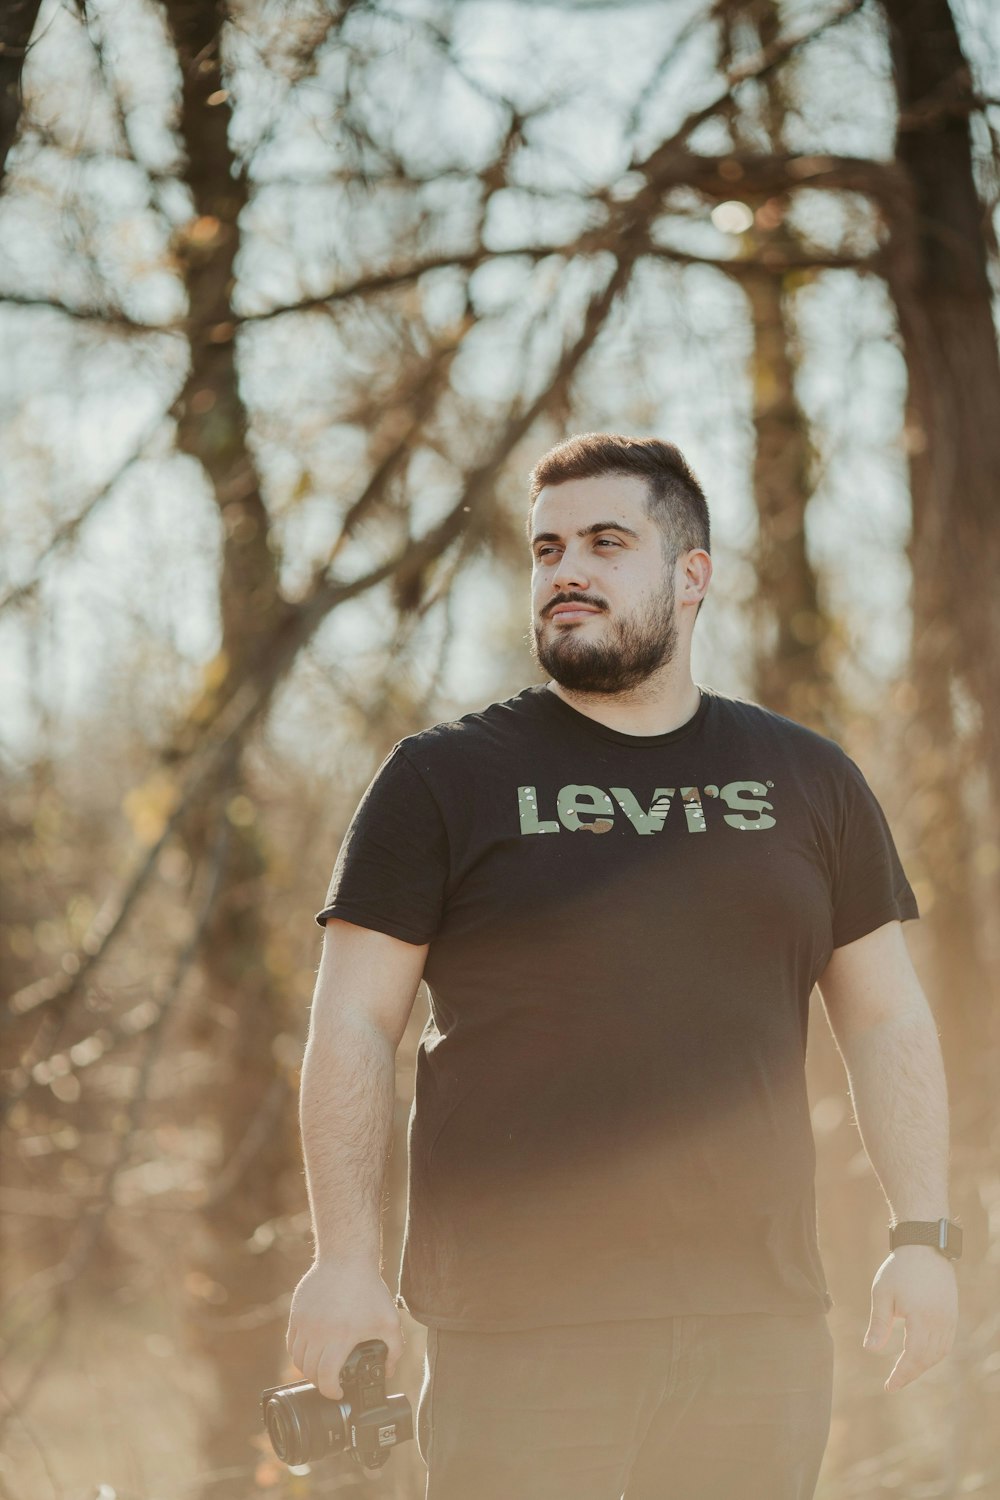 man in black crew neck t-shirt standing near trees during daytime